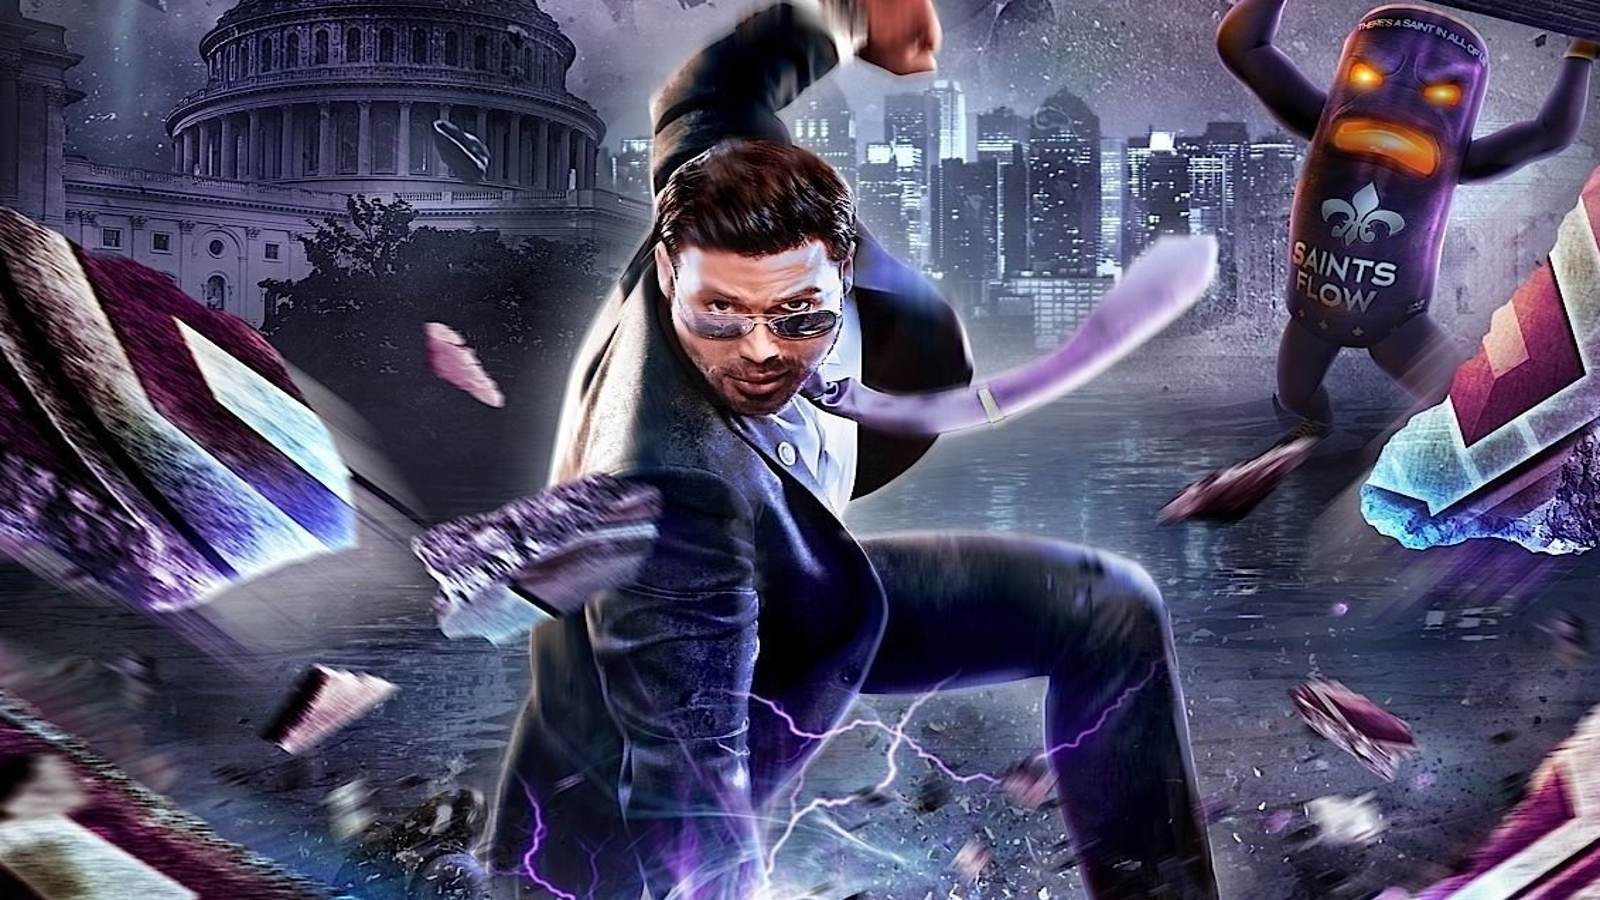 Saints Row review, Is the GTA 6 alternative worth playing?